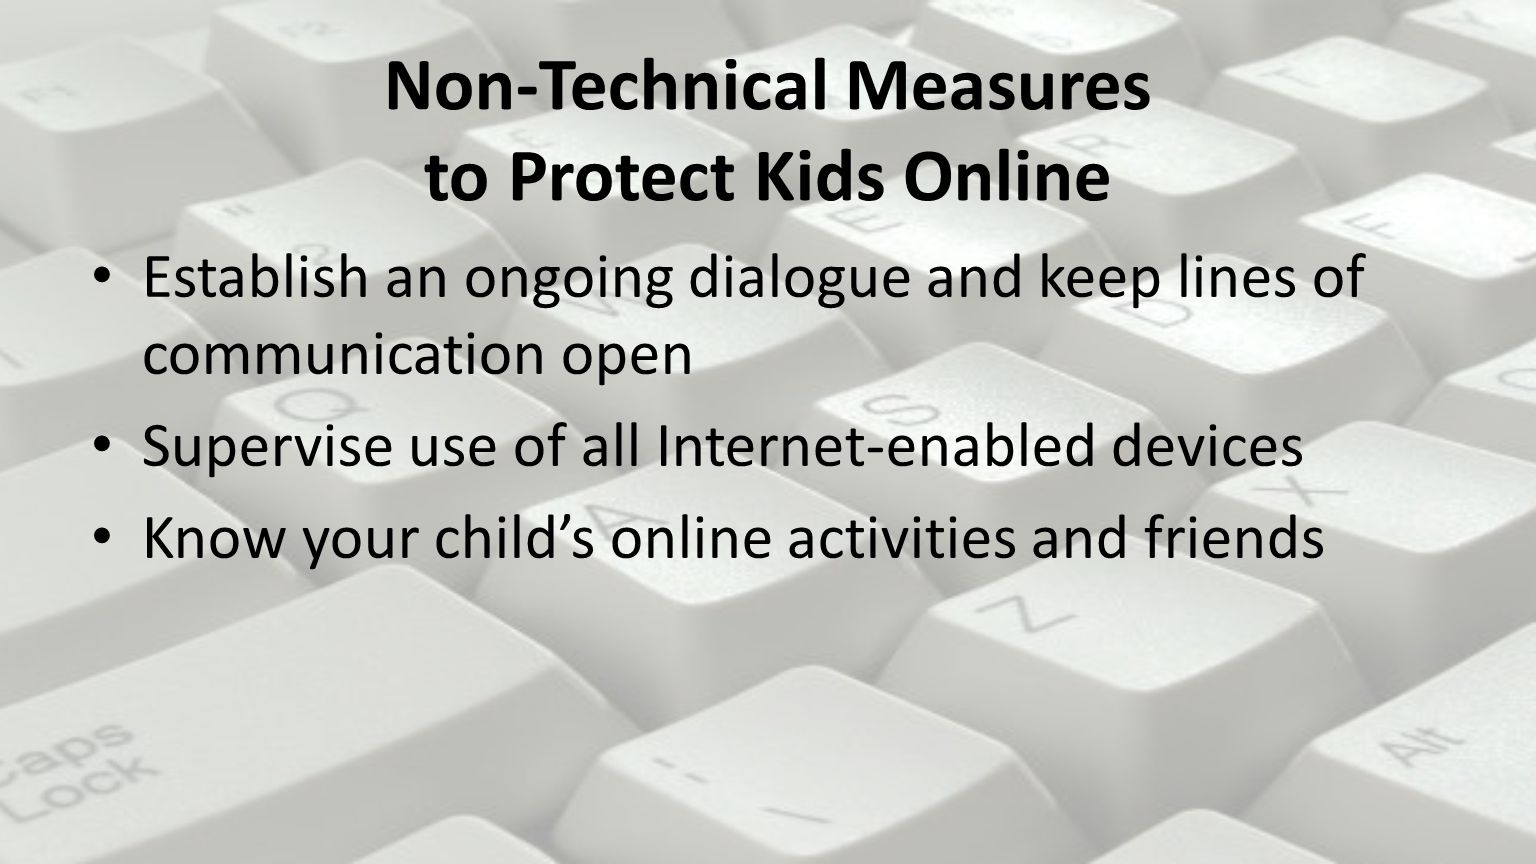 Establish an ongoing dialogue and keep lines of communication open Supervise use of all Internet-enabled devices Know your child’s online activities and friends